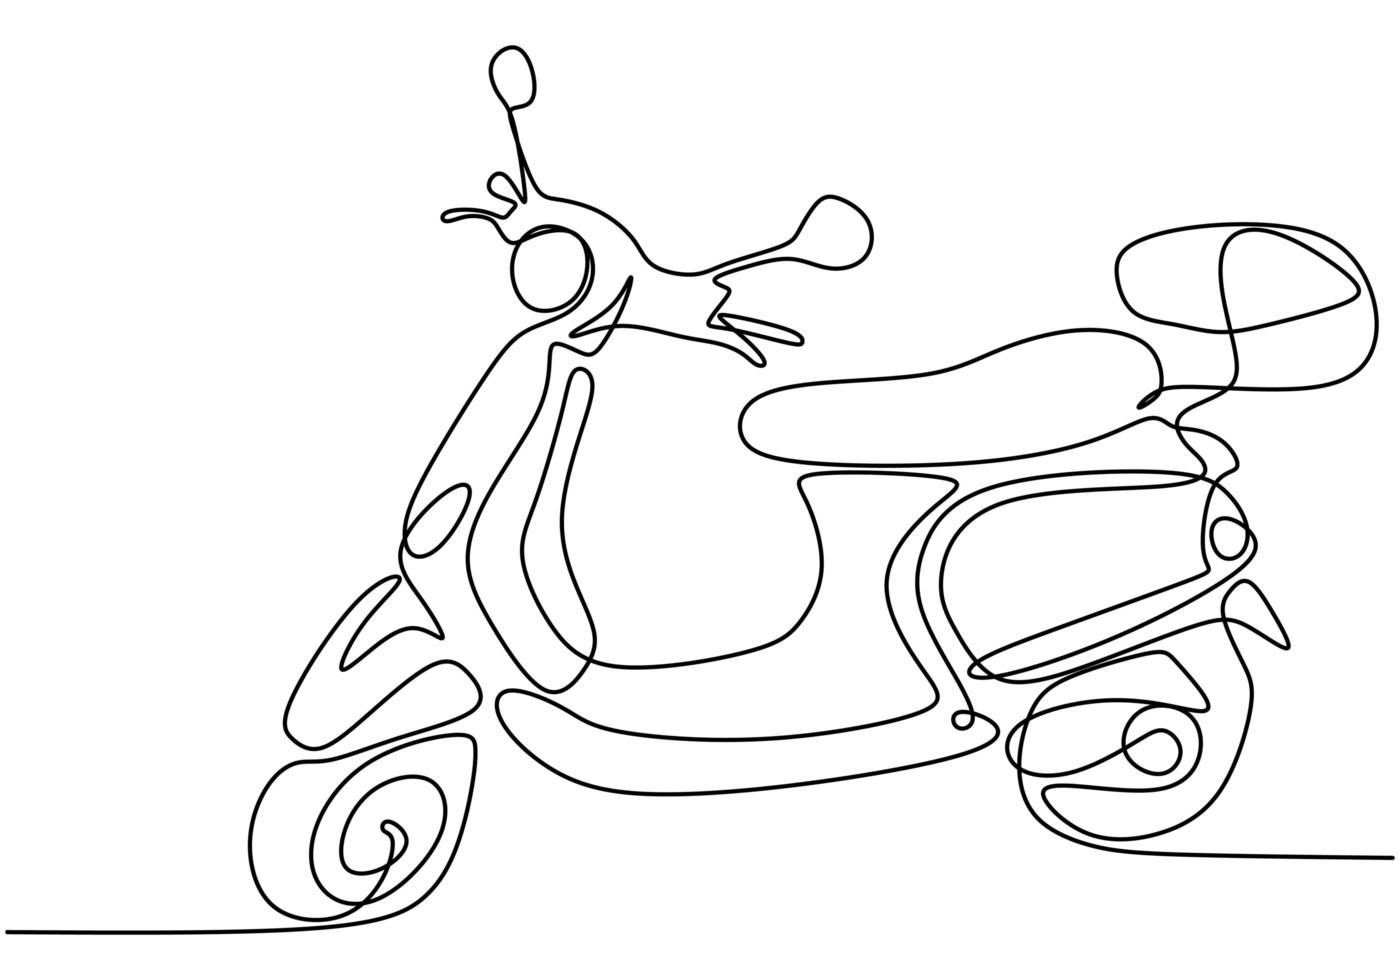 One line drawing motorcycle. Abstract motorcycle hand draw line art minimal design isolated on white background. vector